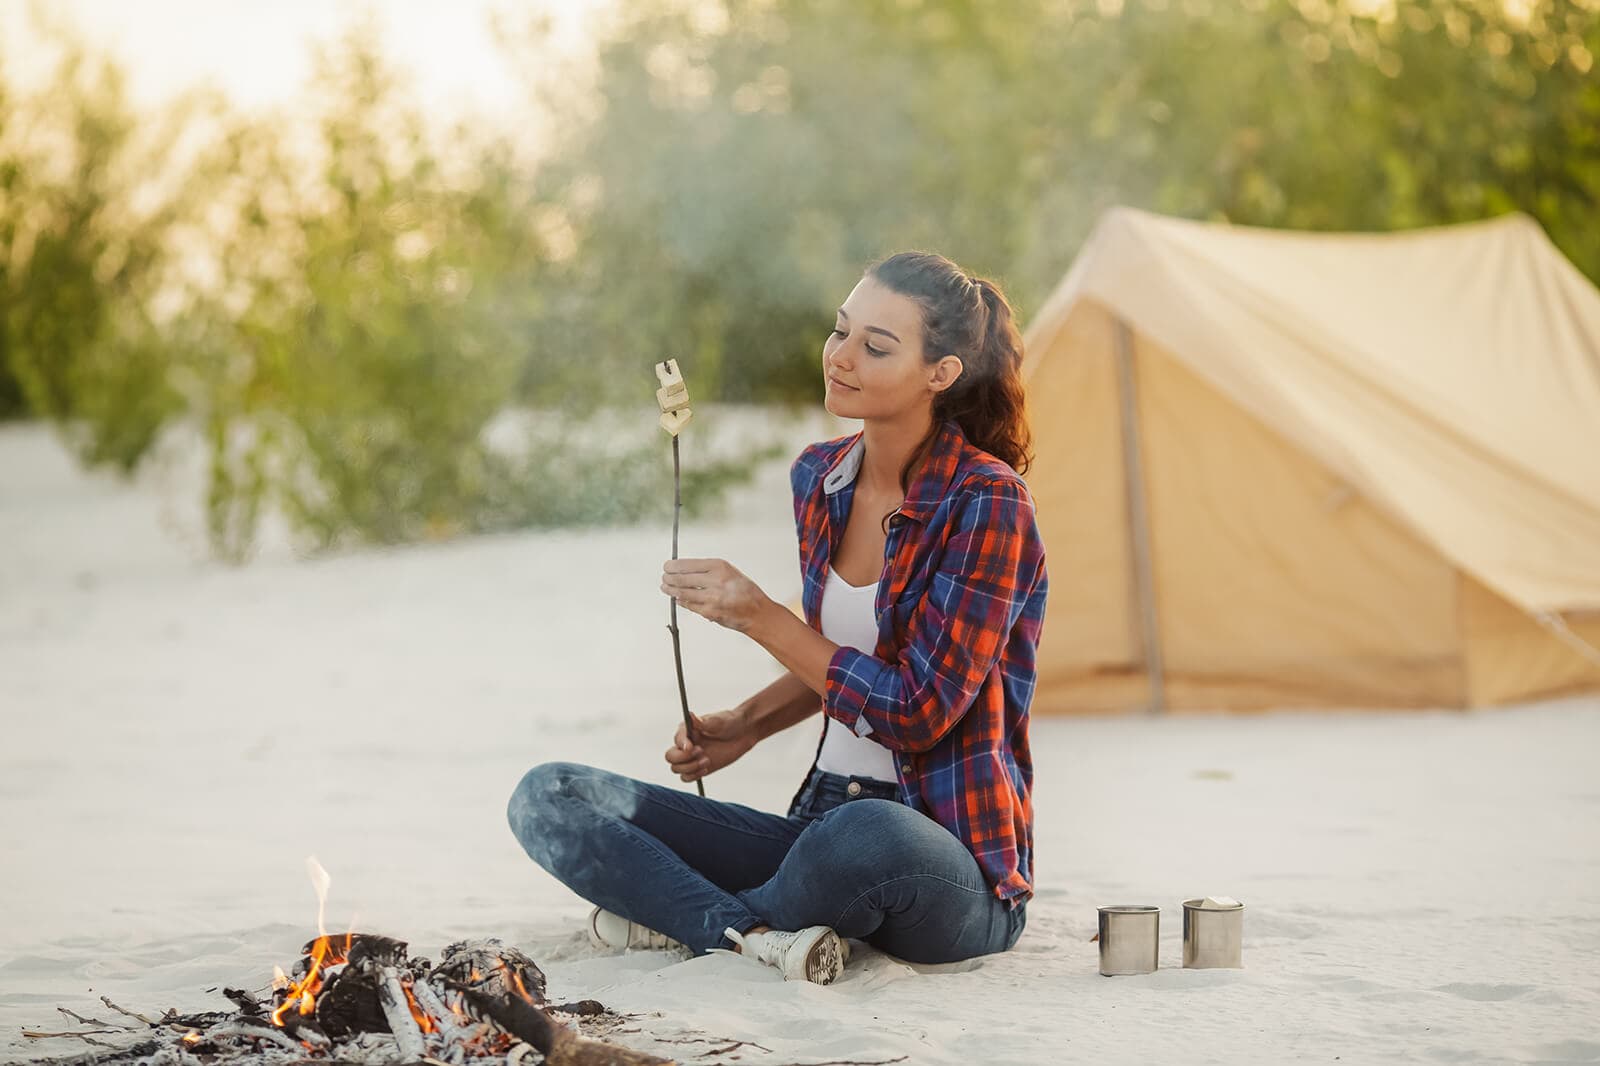 Practical And Safety Solo Camping Tips for Women